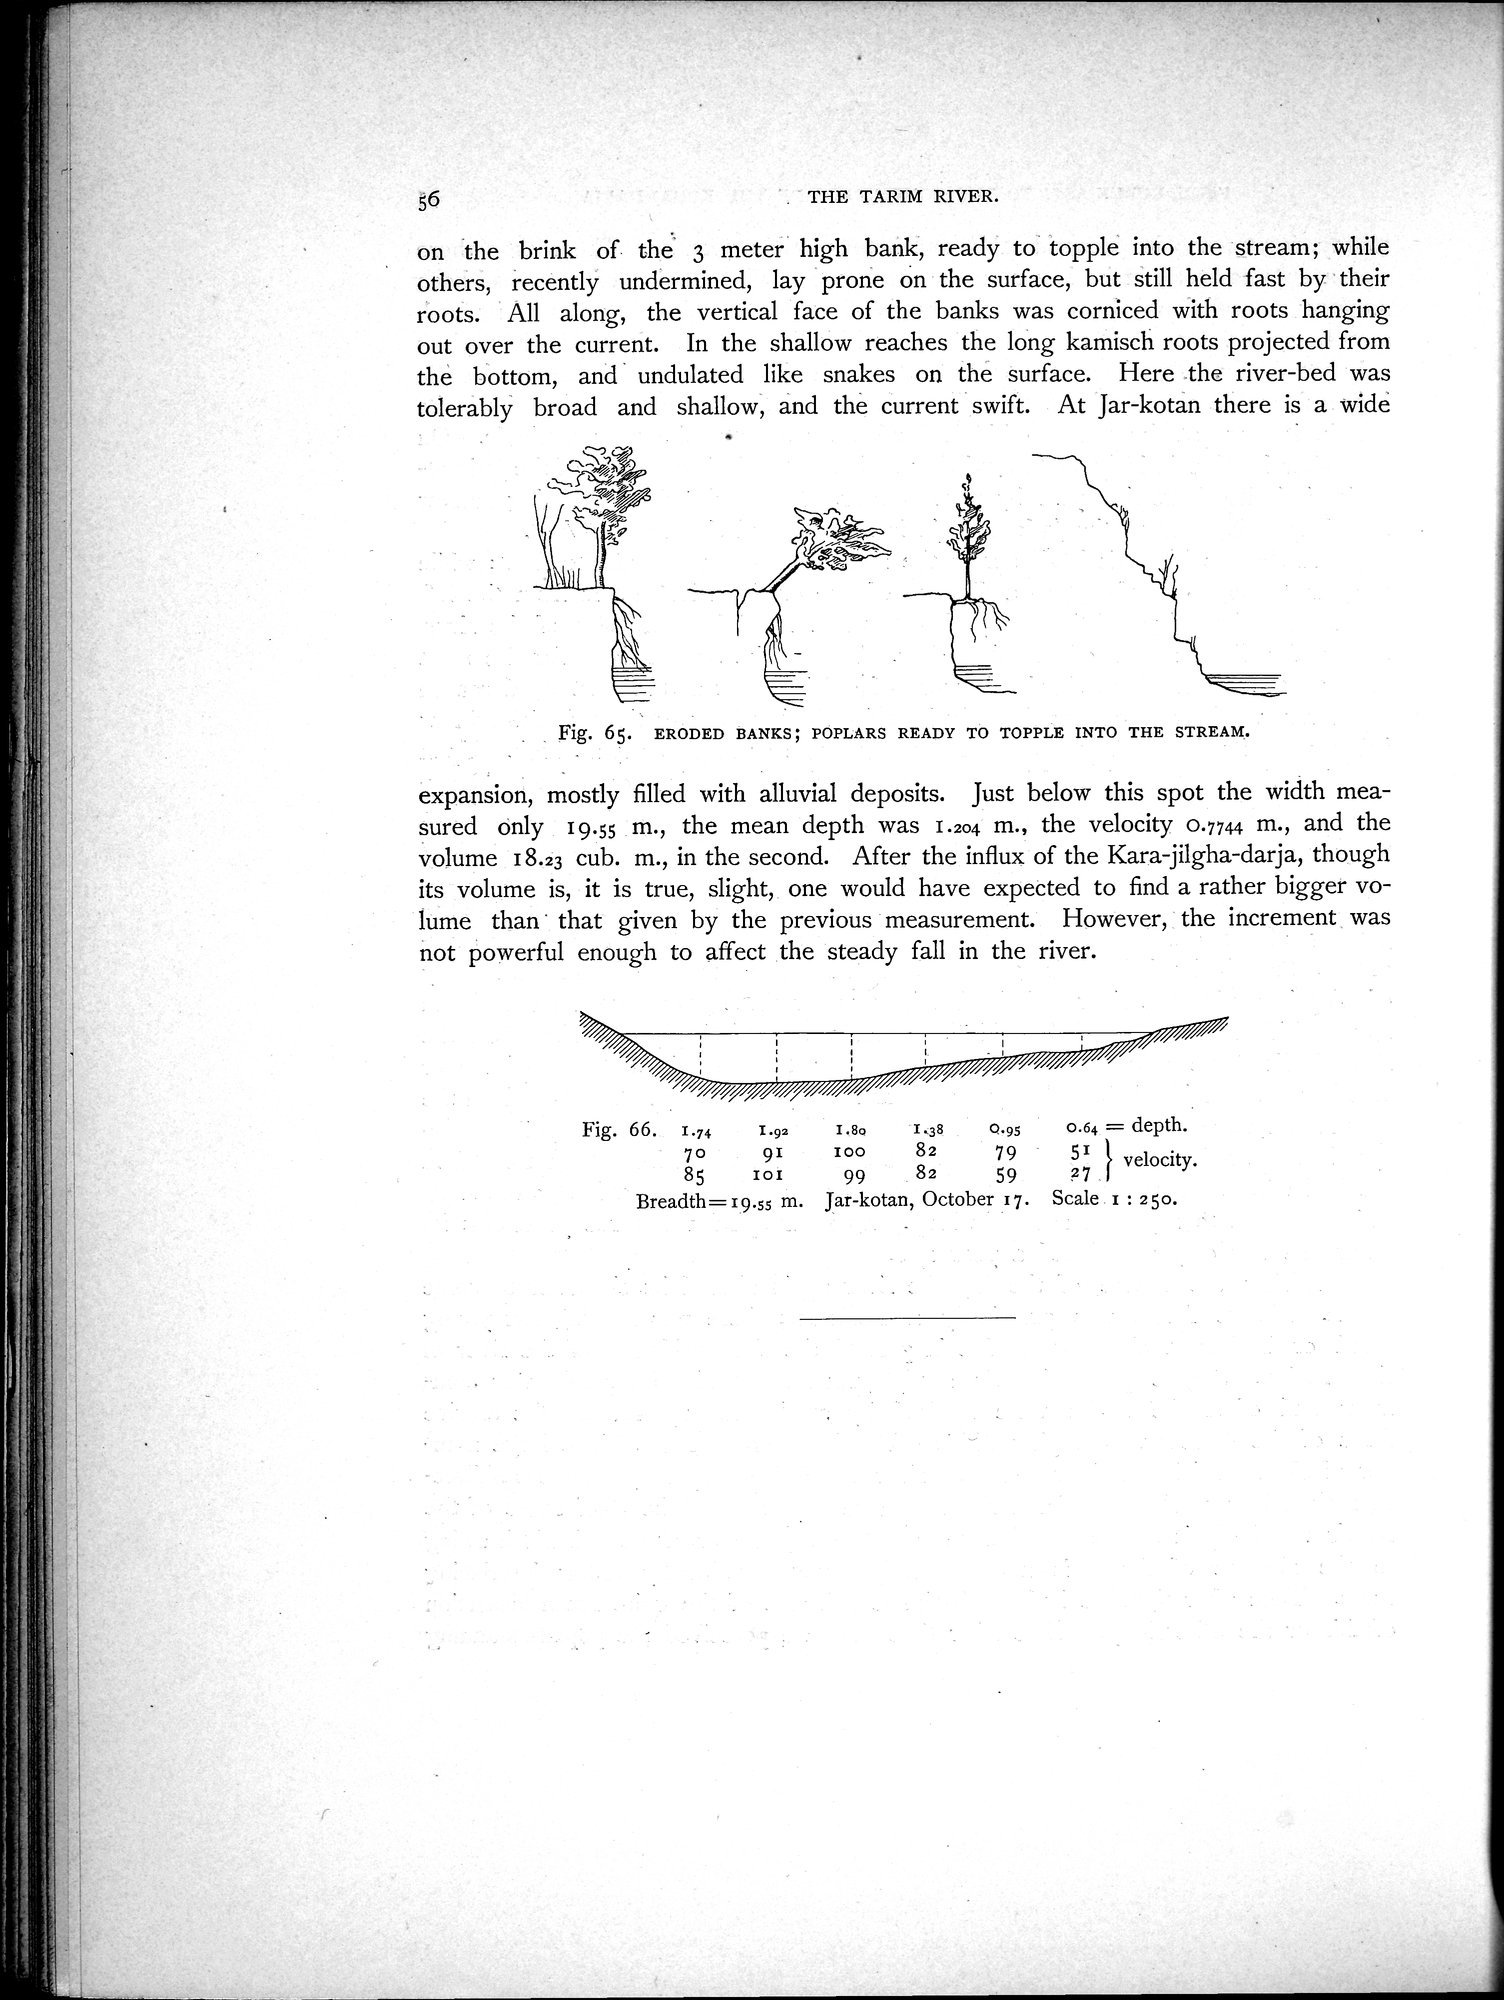 Scientific Results of a Journey in Central Asia, 1899-1902 : vol.1 / 98 ページ（白黒高解像度画像）